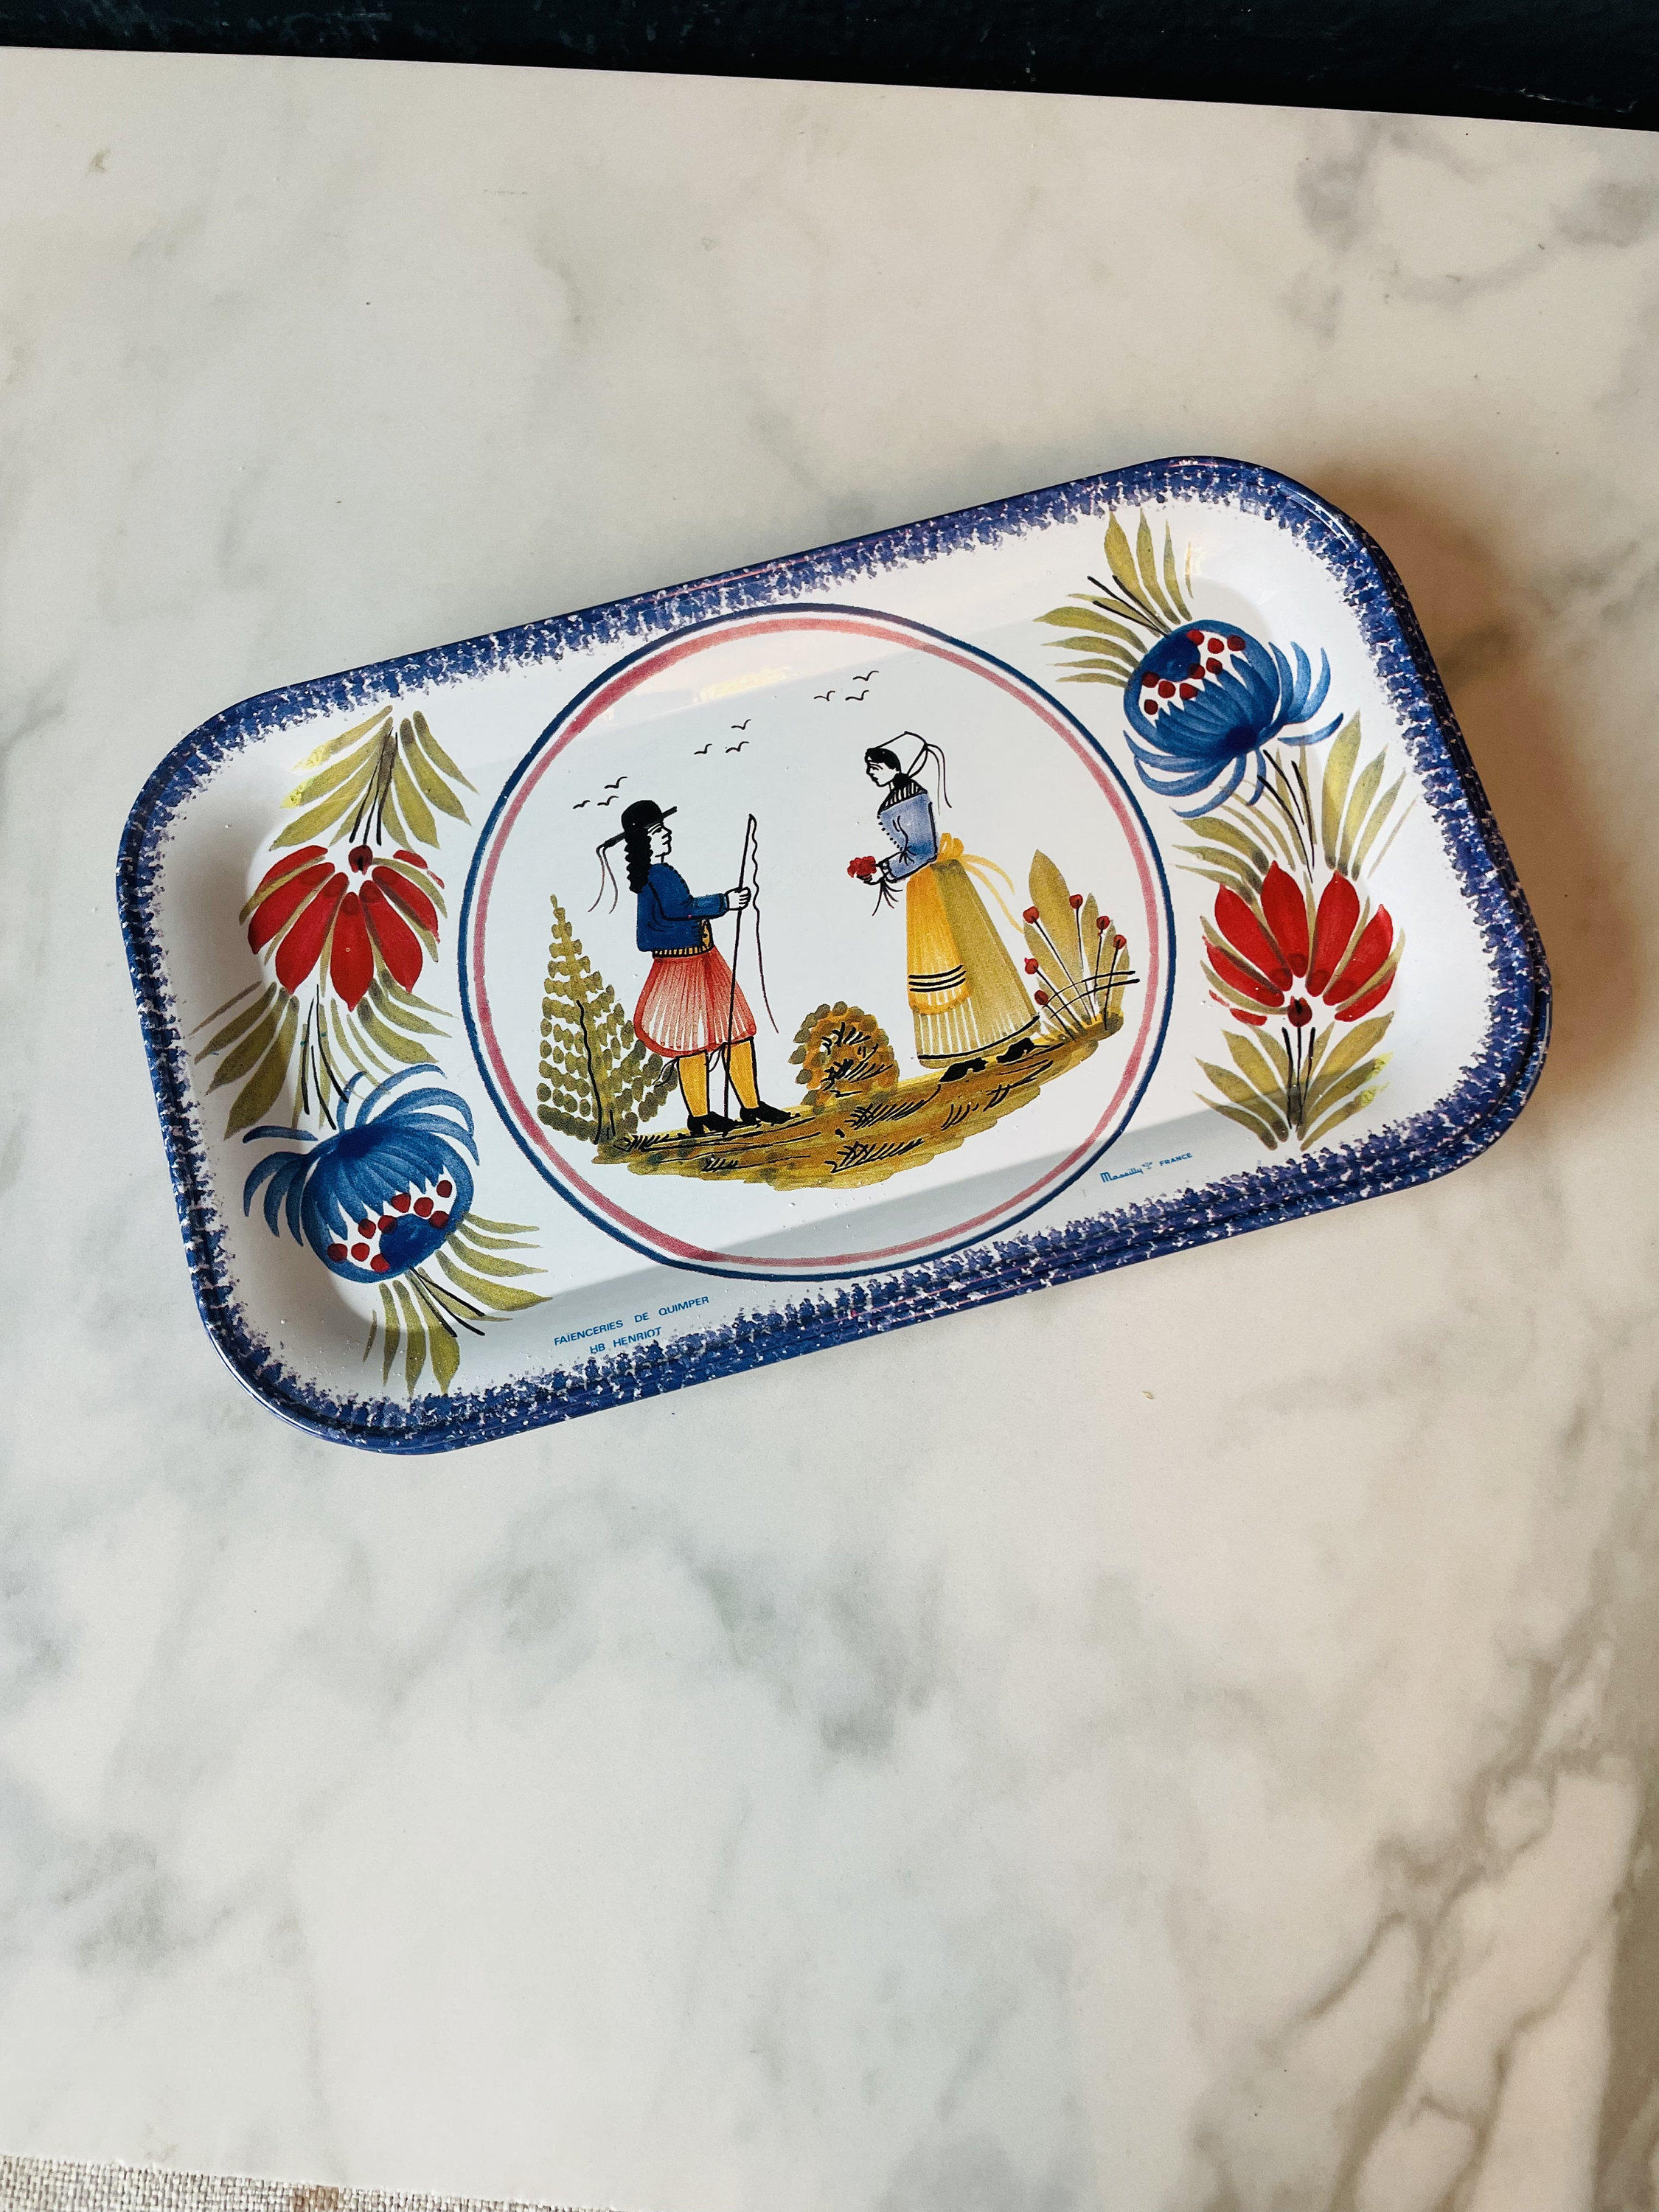 Vintage Silver Metal Folk Art Tray, 1940's Mexico embossed Tin over wood,  Small Rustic Tray